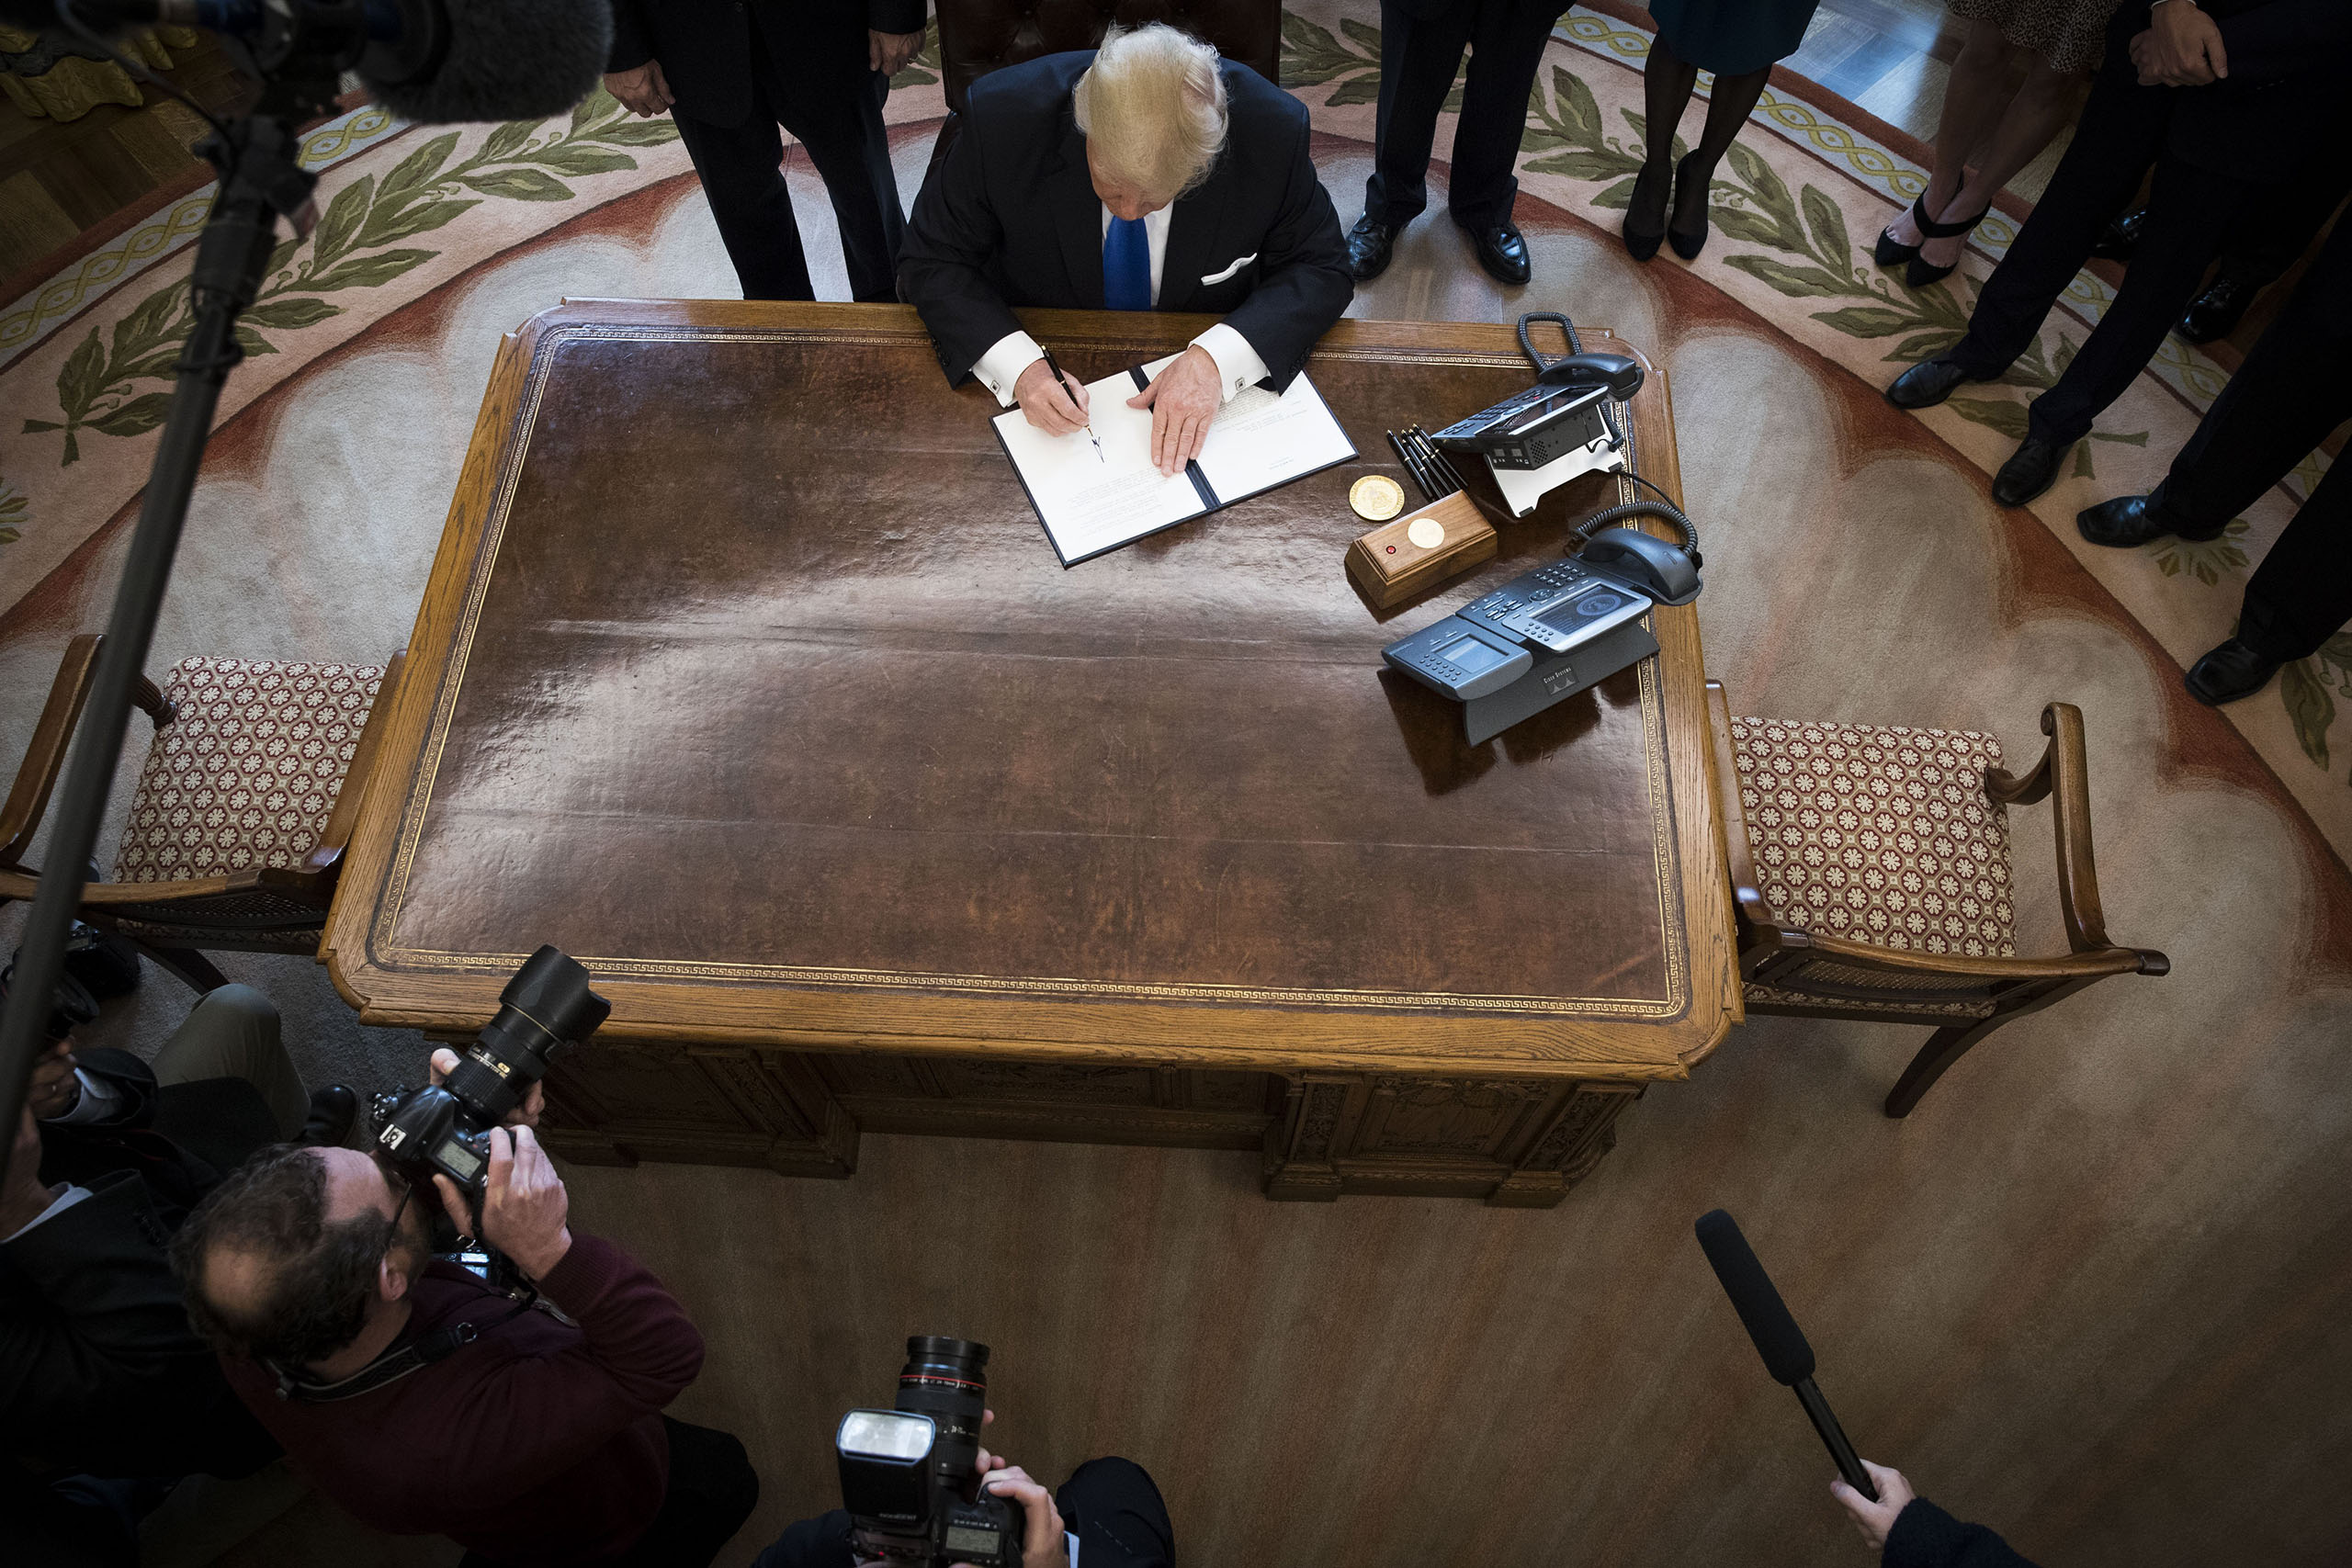 President Donald Trump signs an executive order in the Oval Office of the White House, on Jan. 24, 2017.